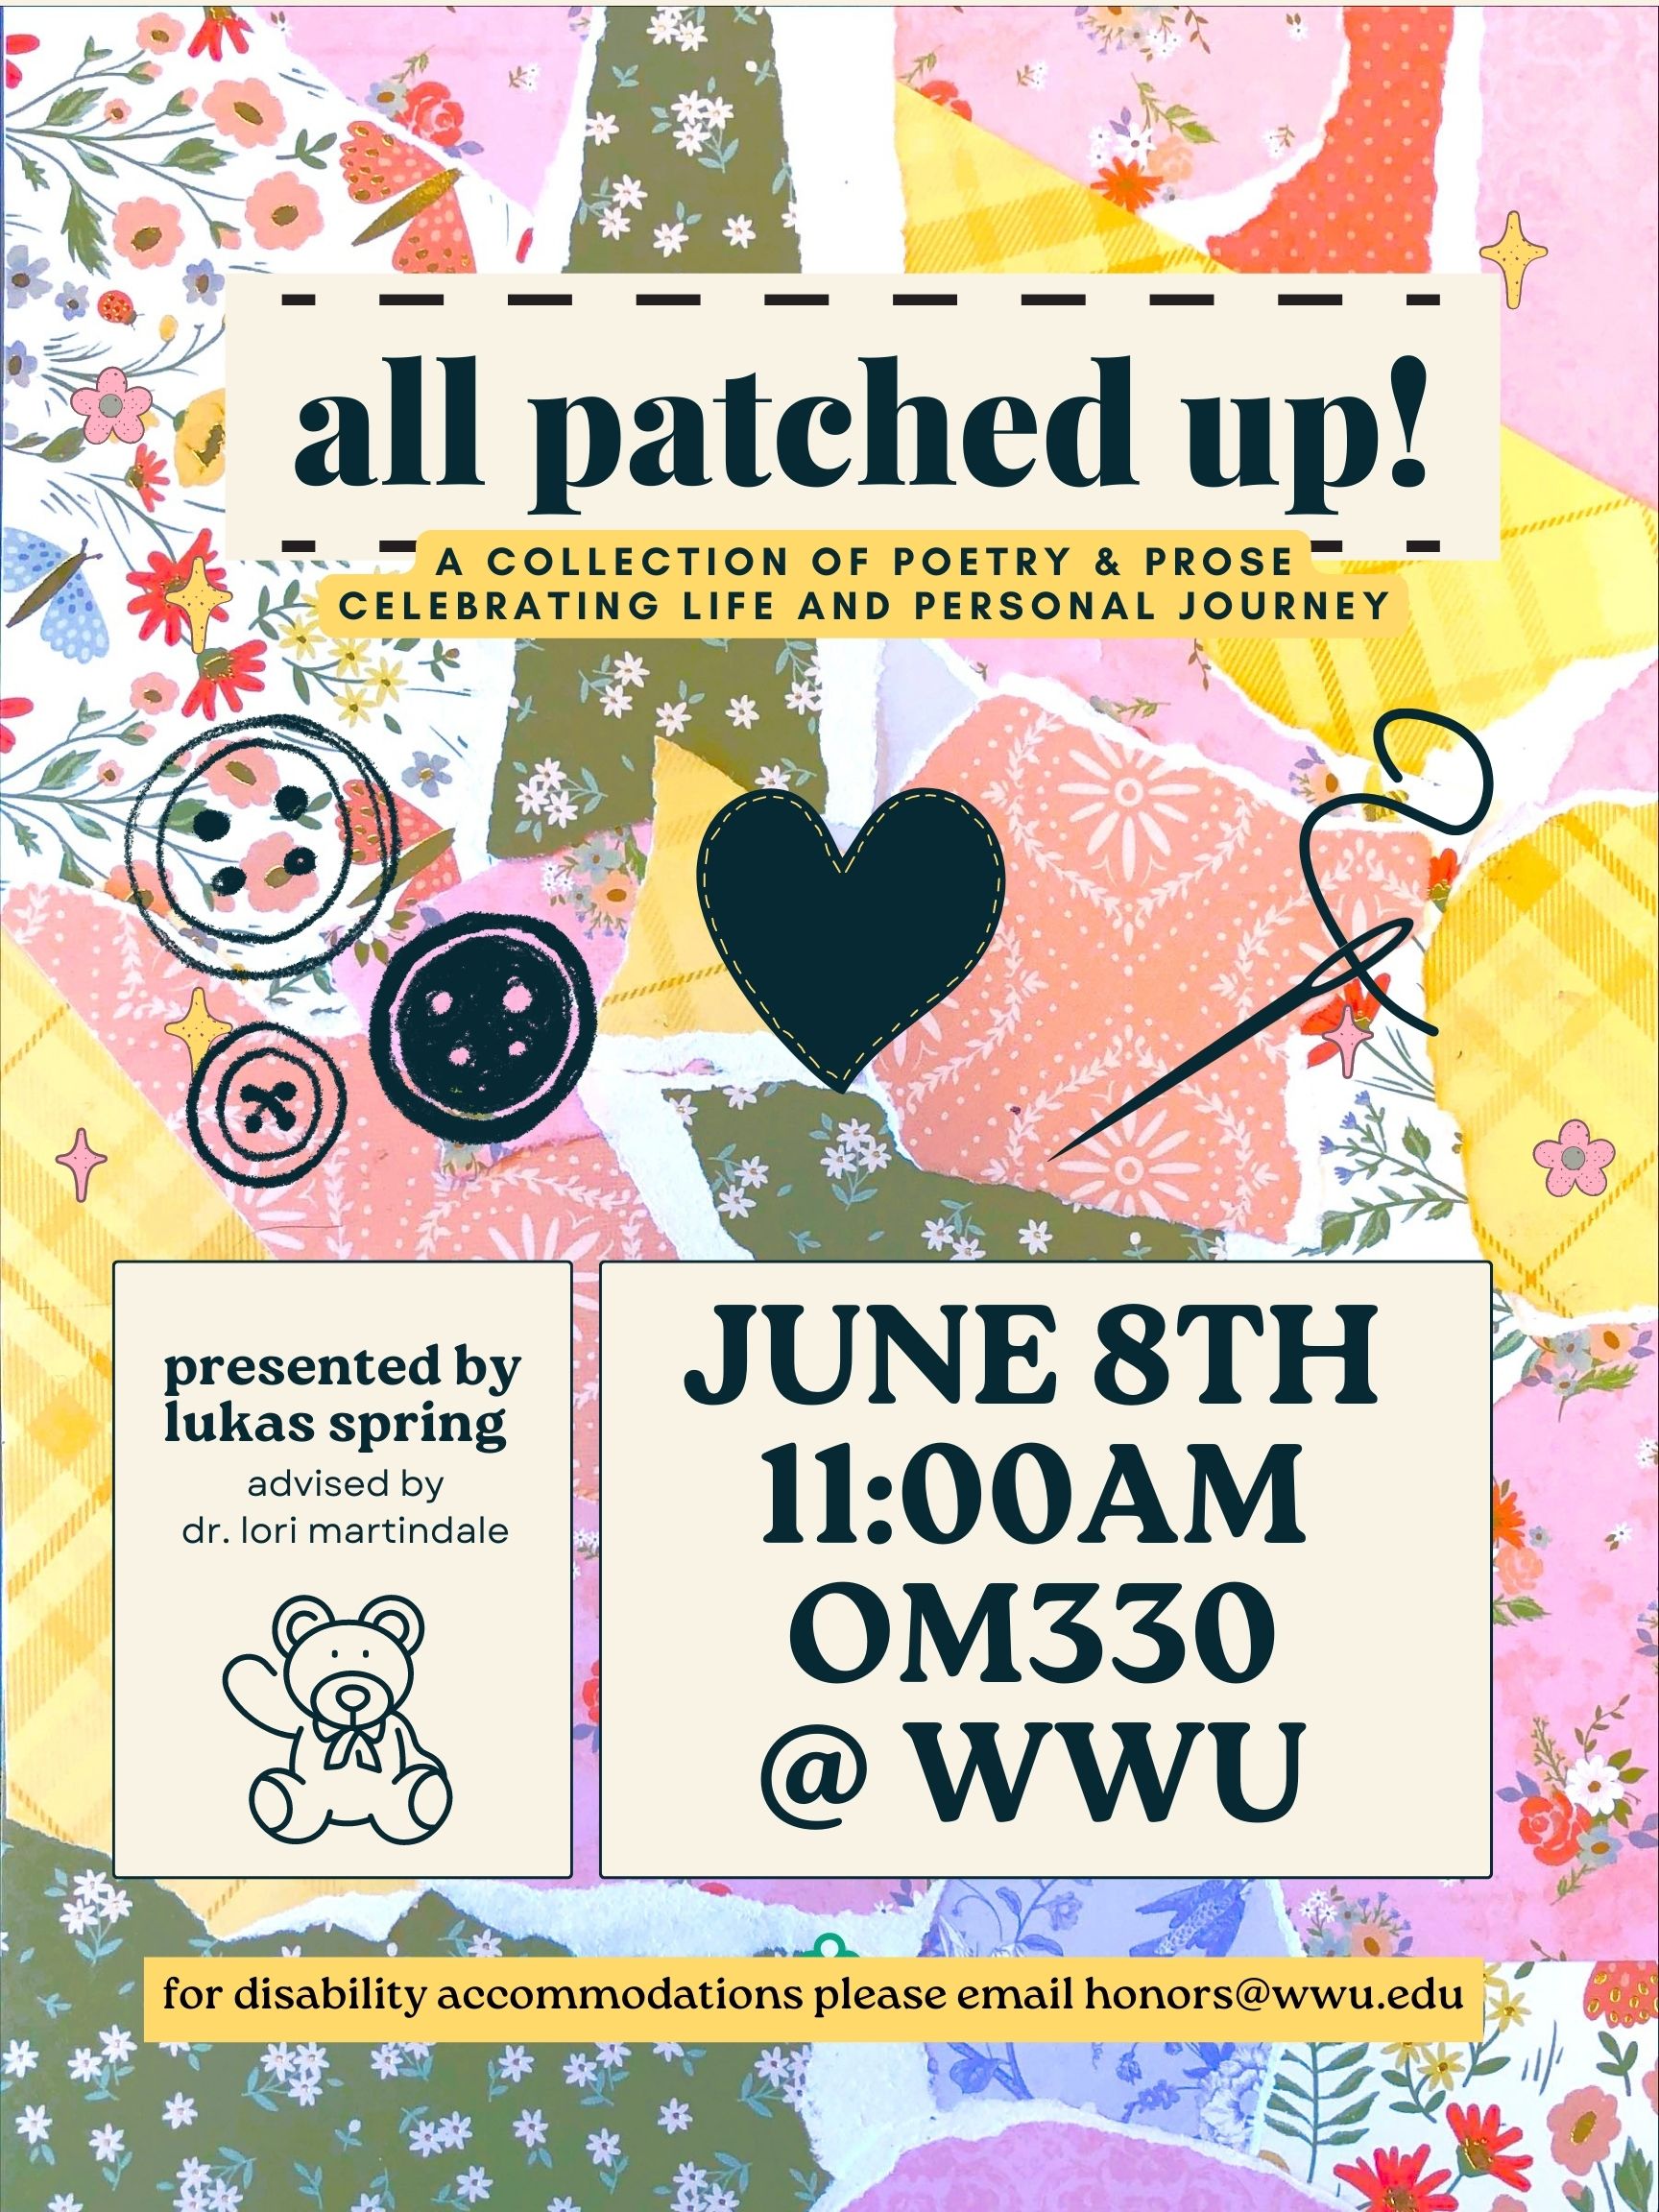 A poster with a scrapbook paper background and graphics of buttons, a sewing needle, and a teddy bear. Text reads: "All patched up! A collection of poetry & prose celebrating life and personal journey. Presented by Lukas Spring, advised by Dr. Lori Martindale. June 8th 11:00 am OM330 @ WWU. For disability accommodations please email honors@wwu.edu."